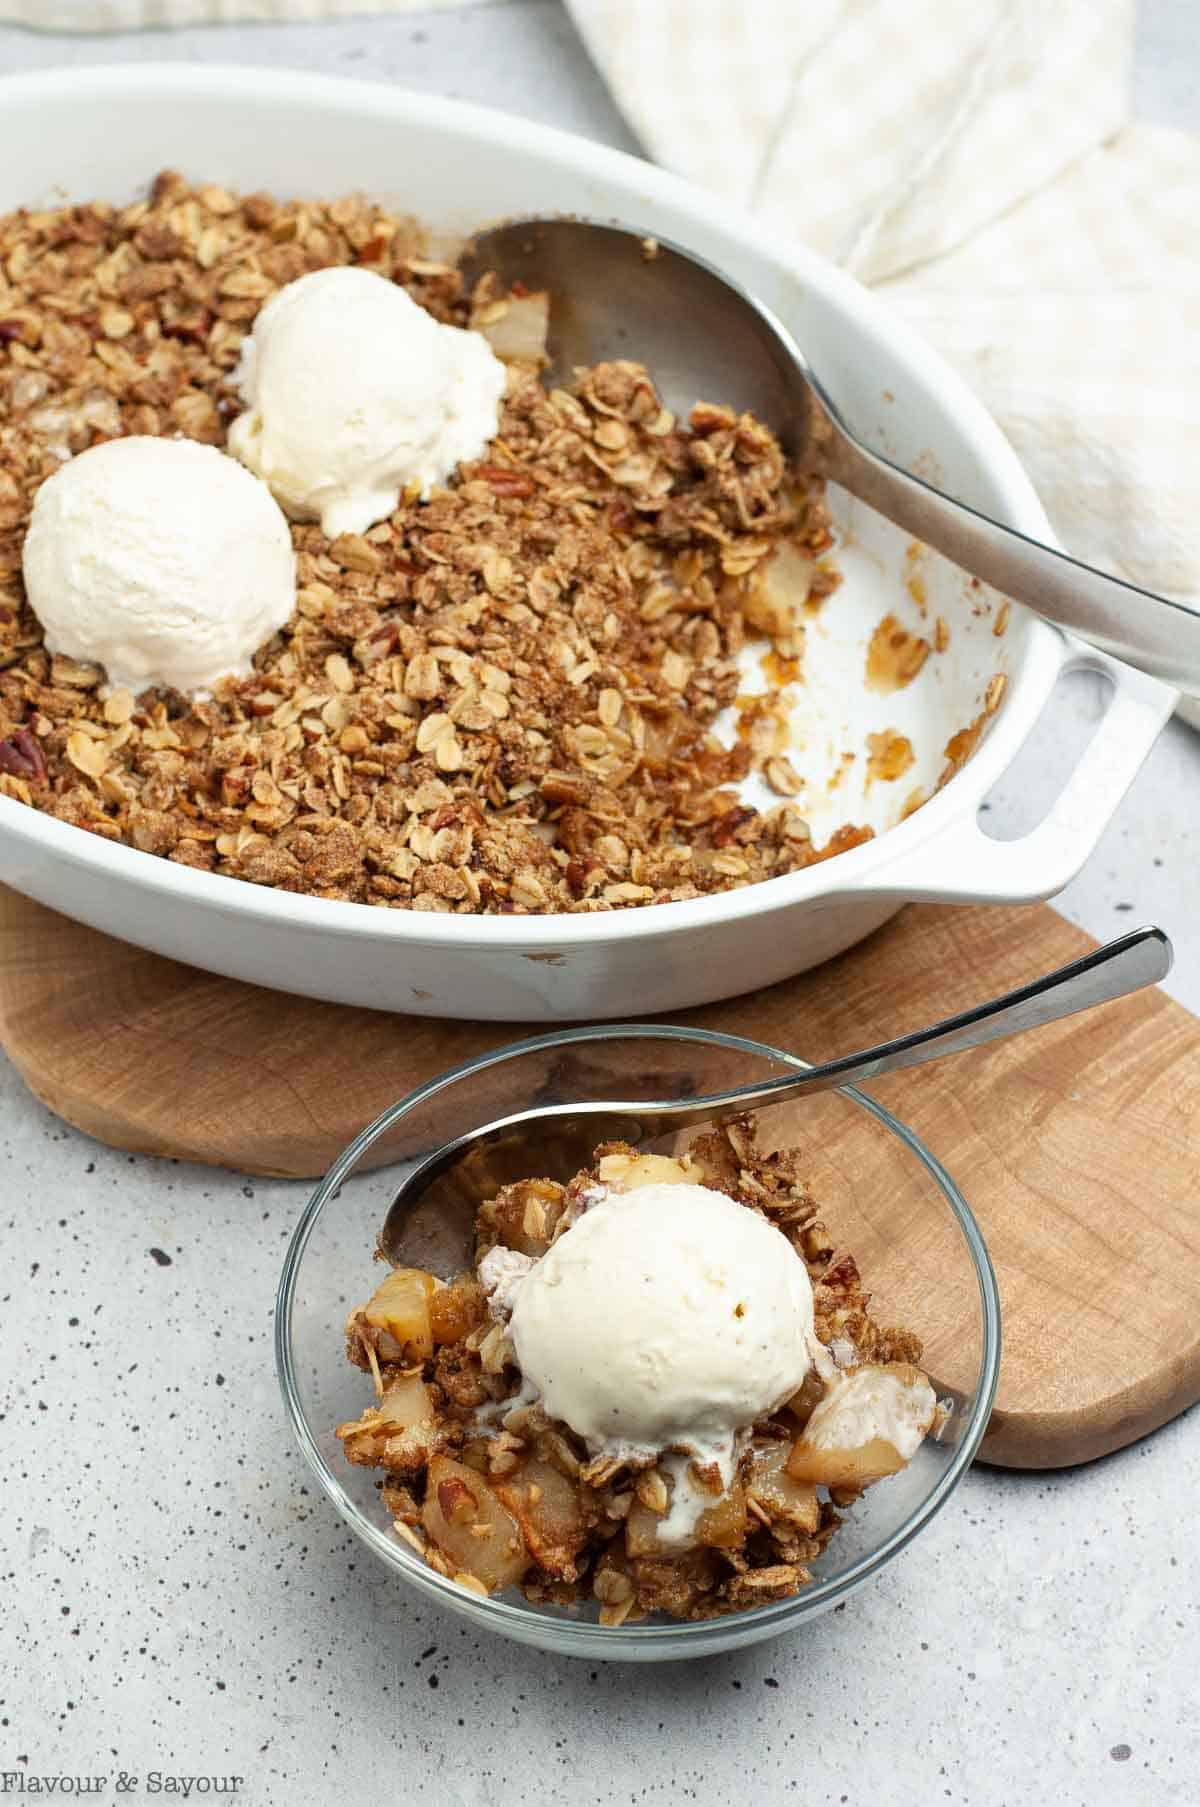 A baking dish and a dessert glass with pecan pear crisp and a scoop of ice cream.